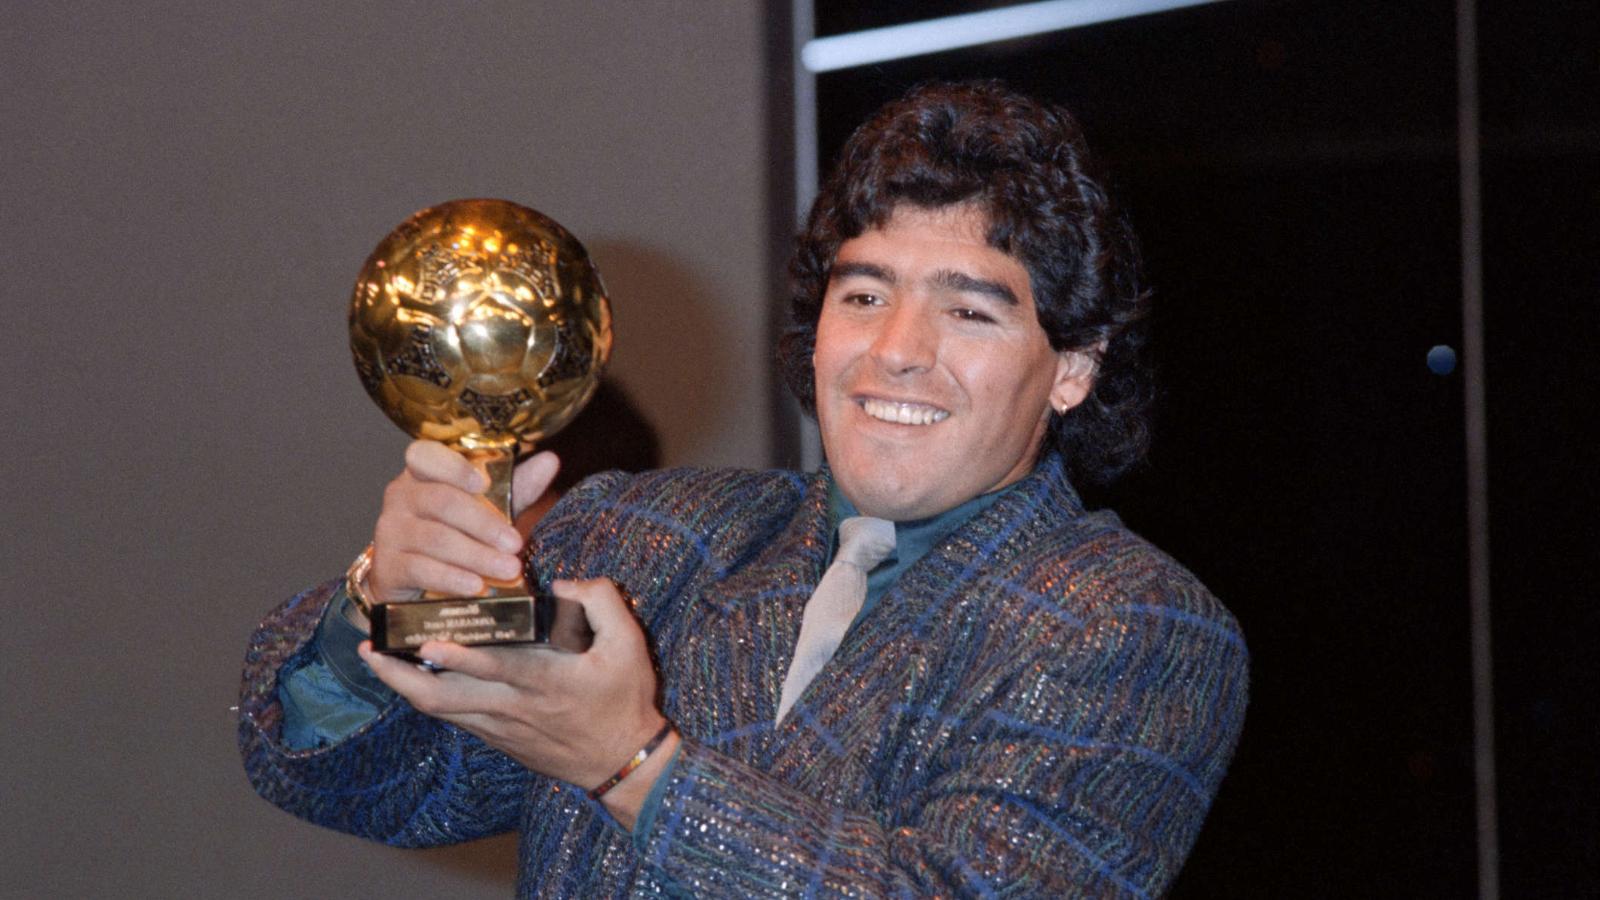 Maradona's Ballon d'Or is set to be auctioned off after a French court ruled against the football star's heirs.